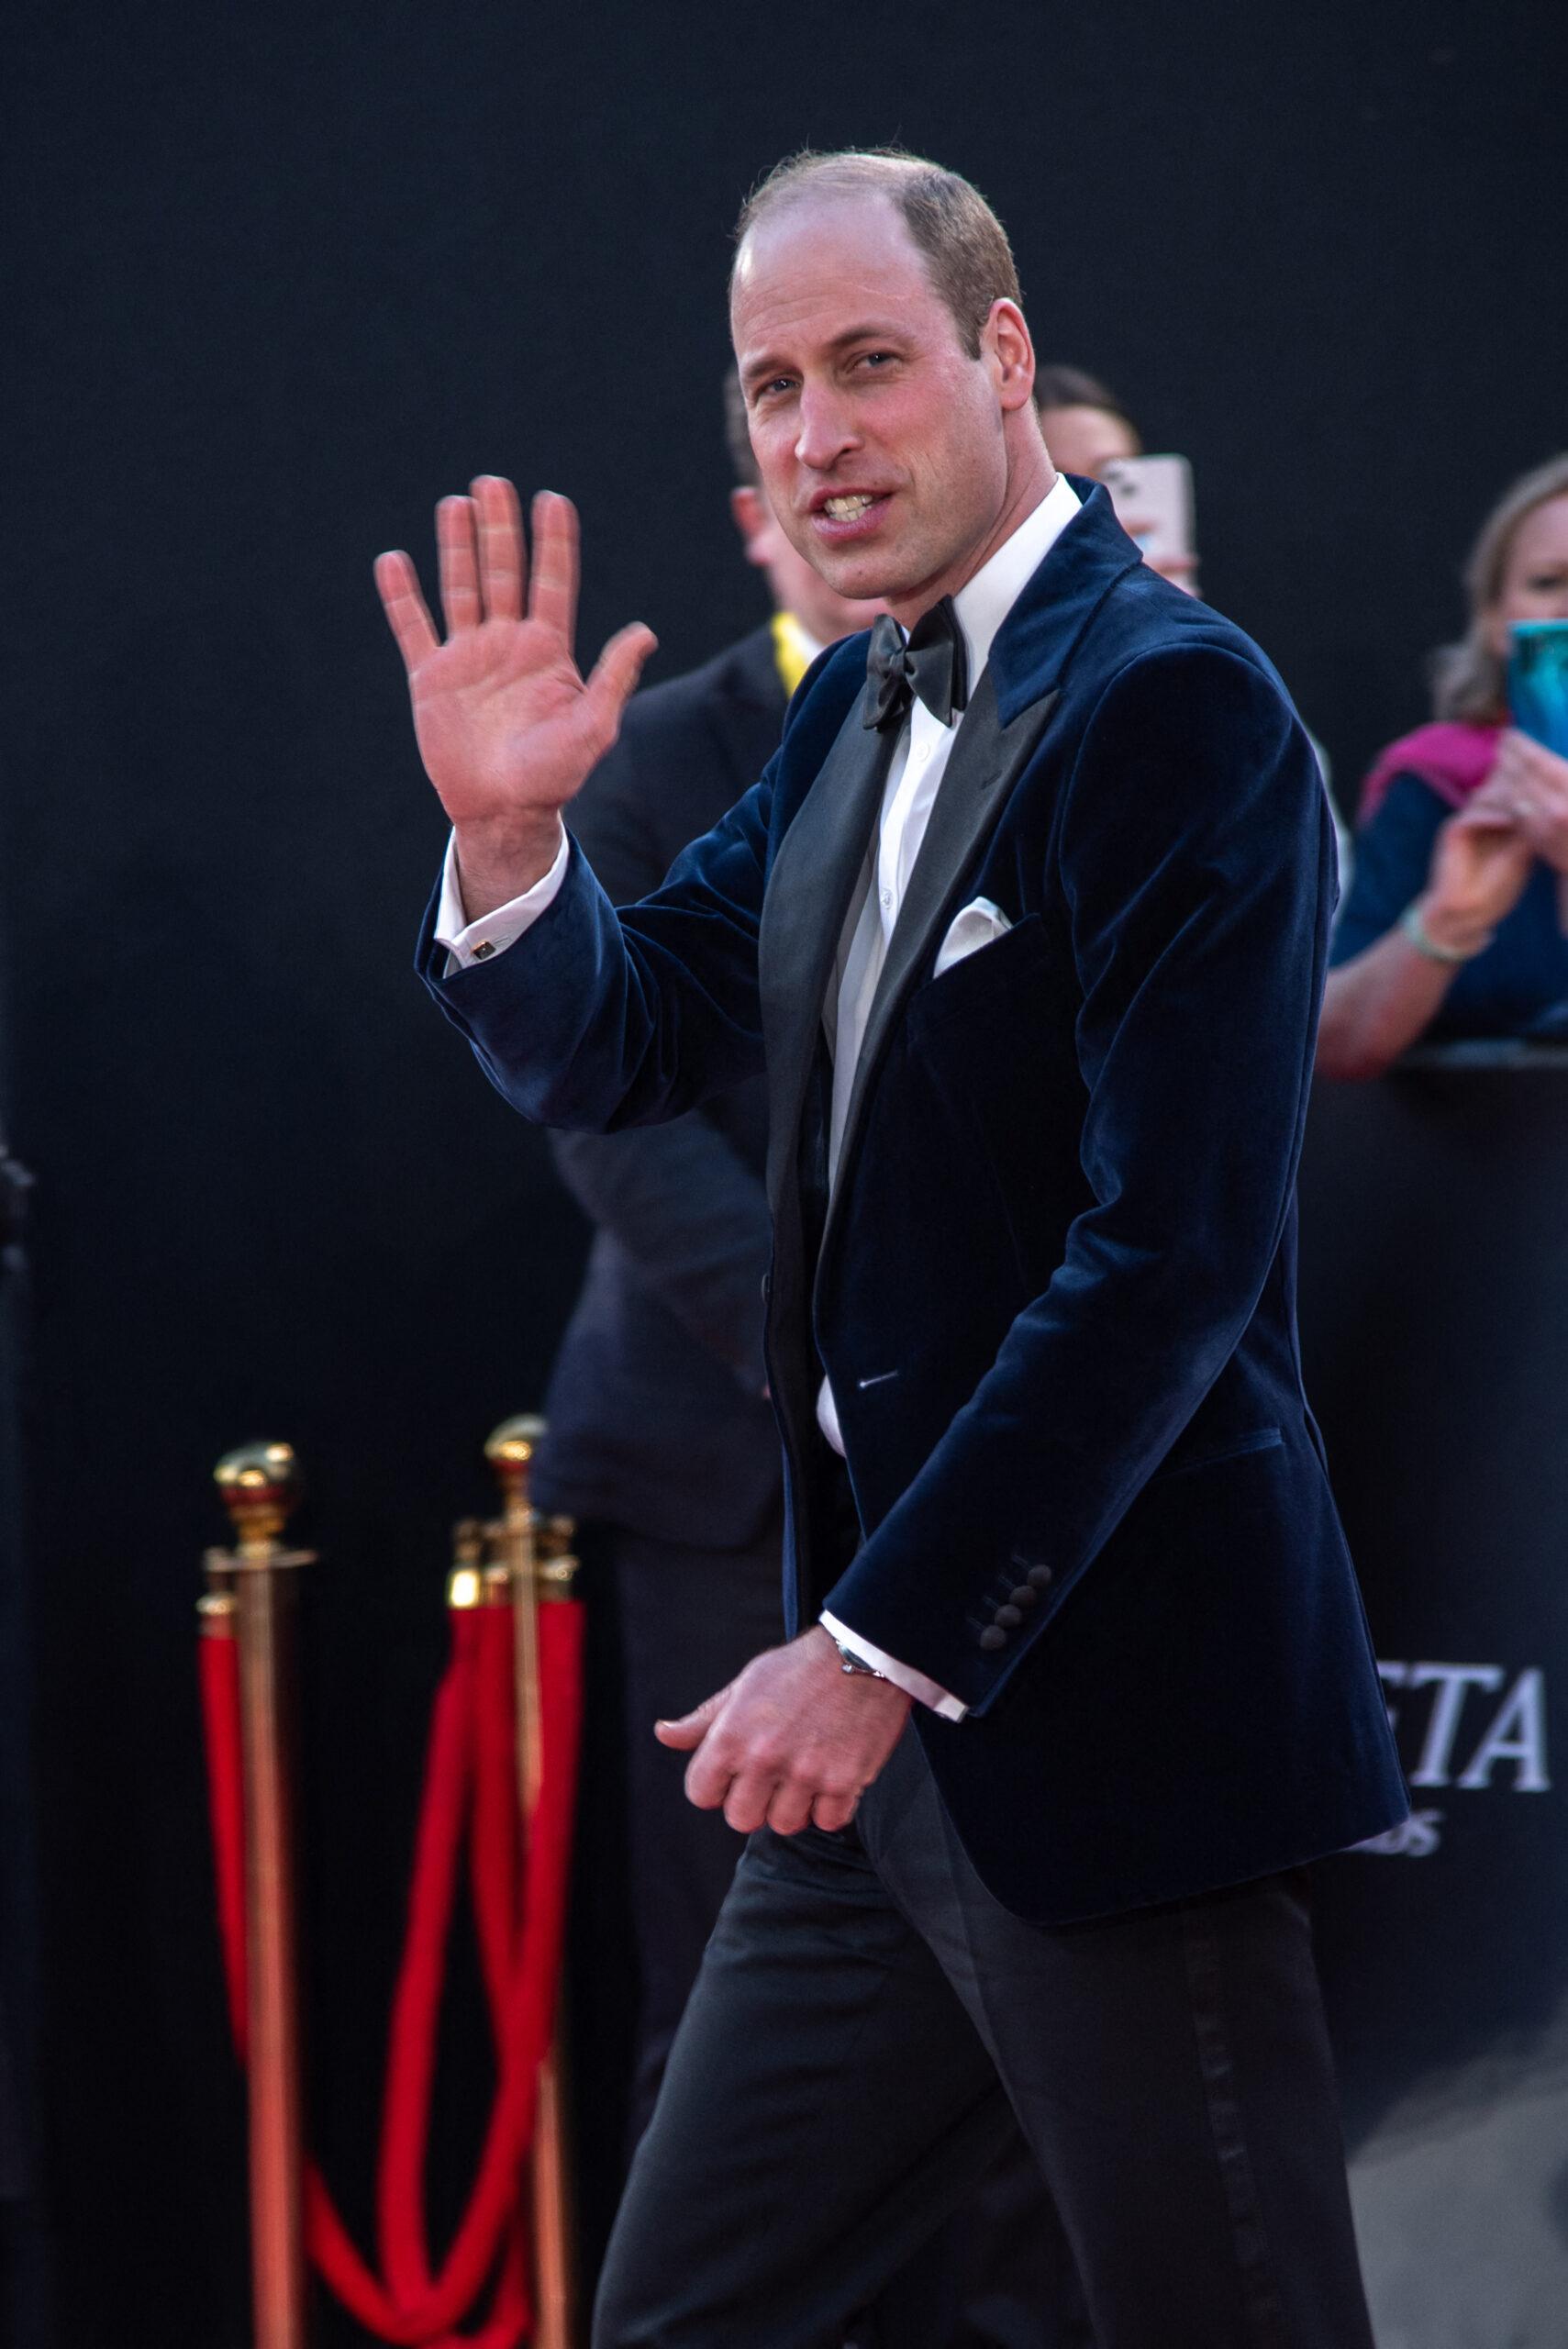 Prince William wearing a suit waves his right hand.